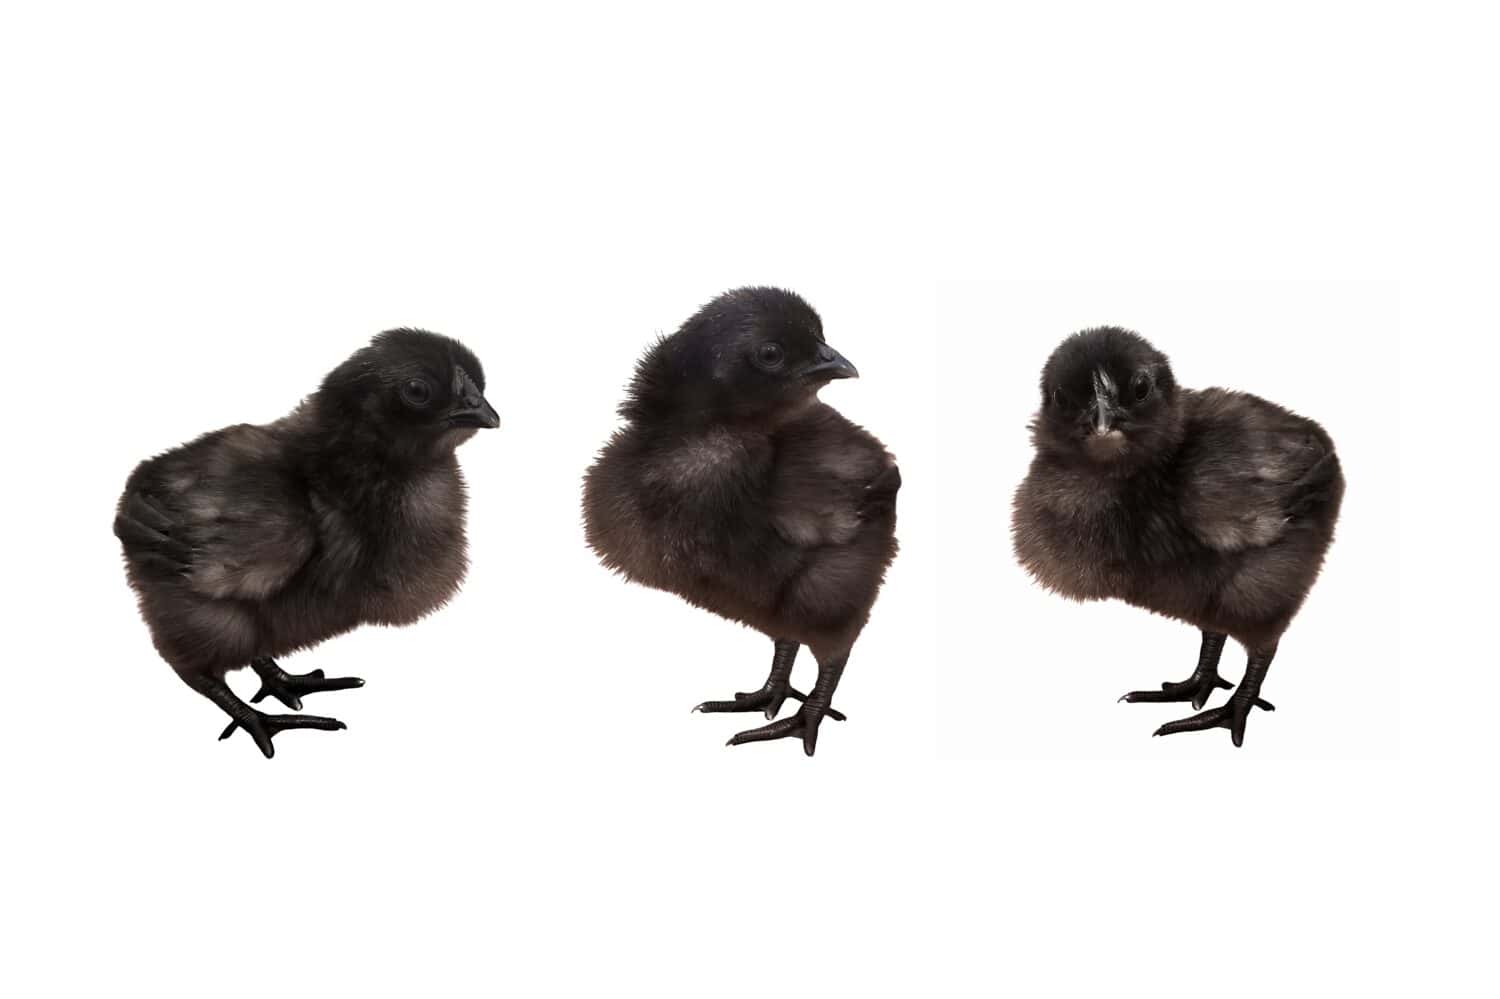 Three black chicks posing in front of a white background. Young poultry. Chickens of Chinese breed with black feathers and skin.